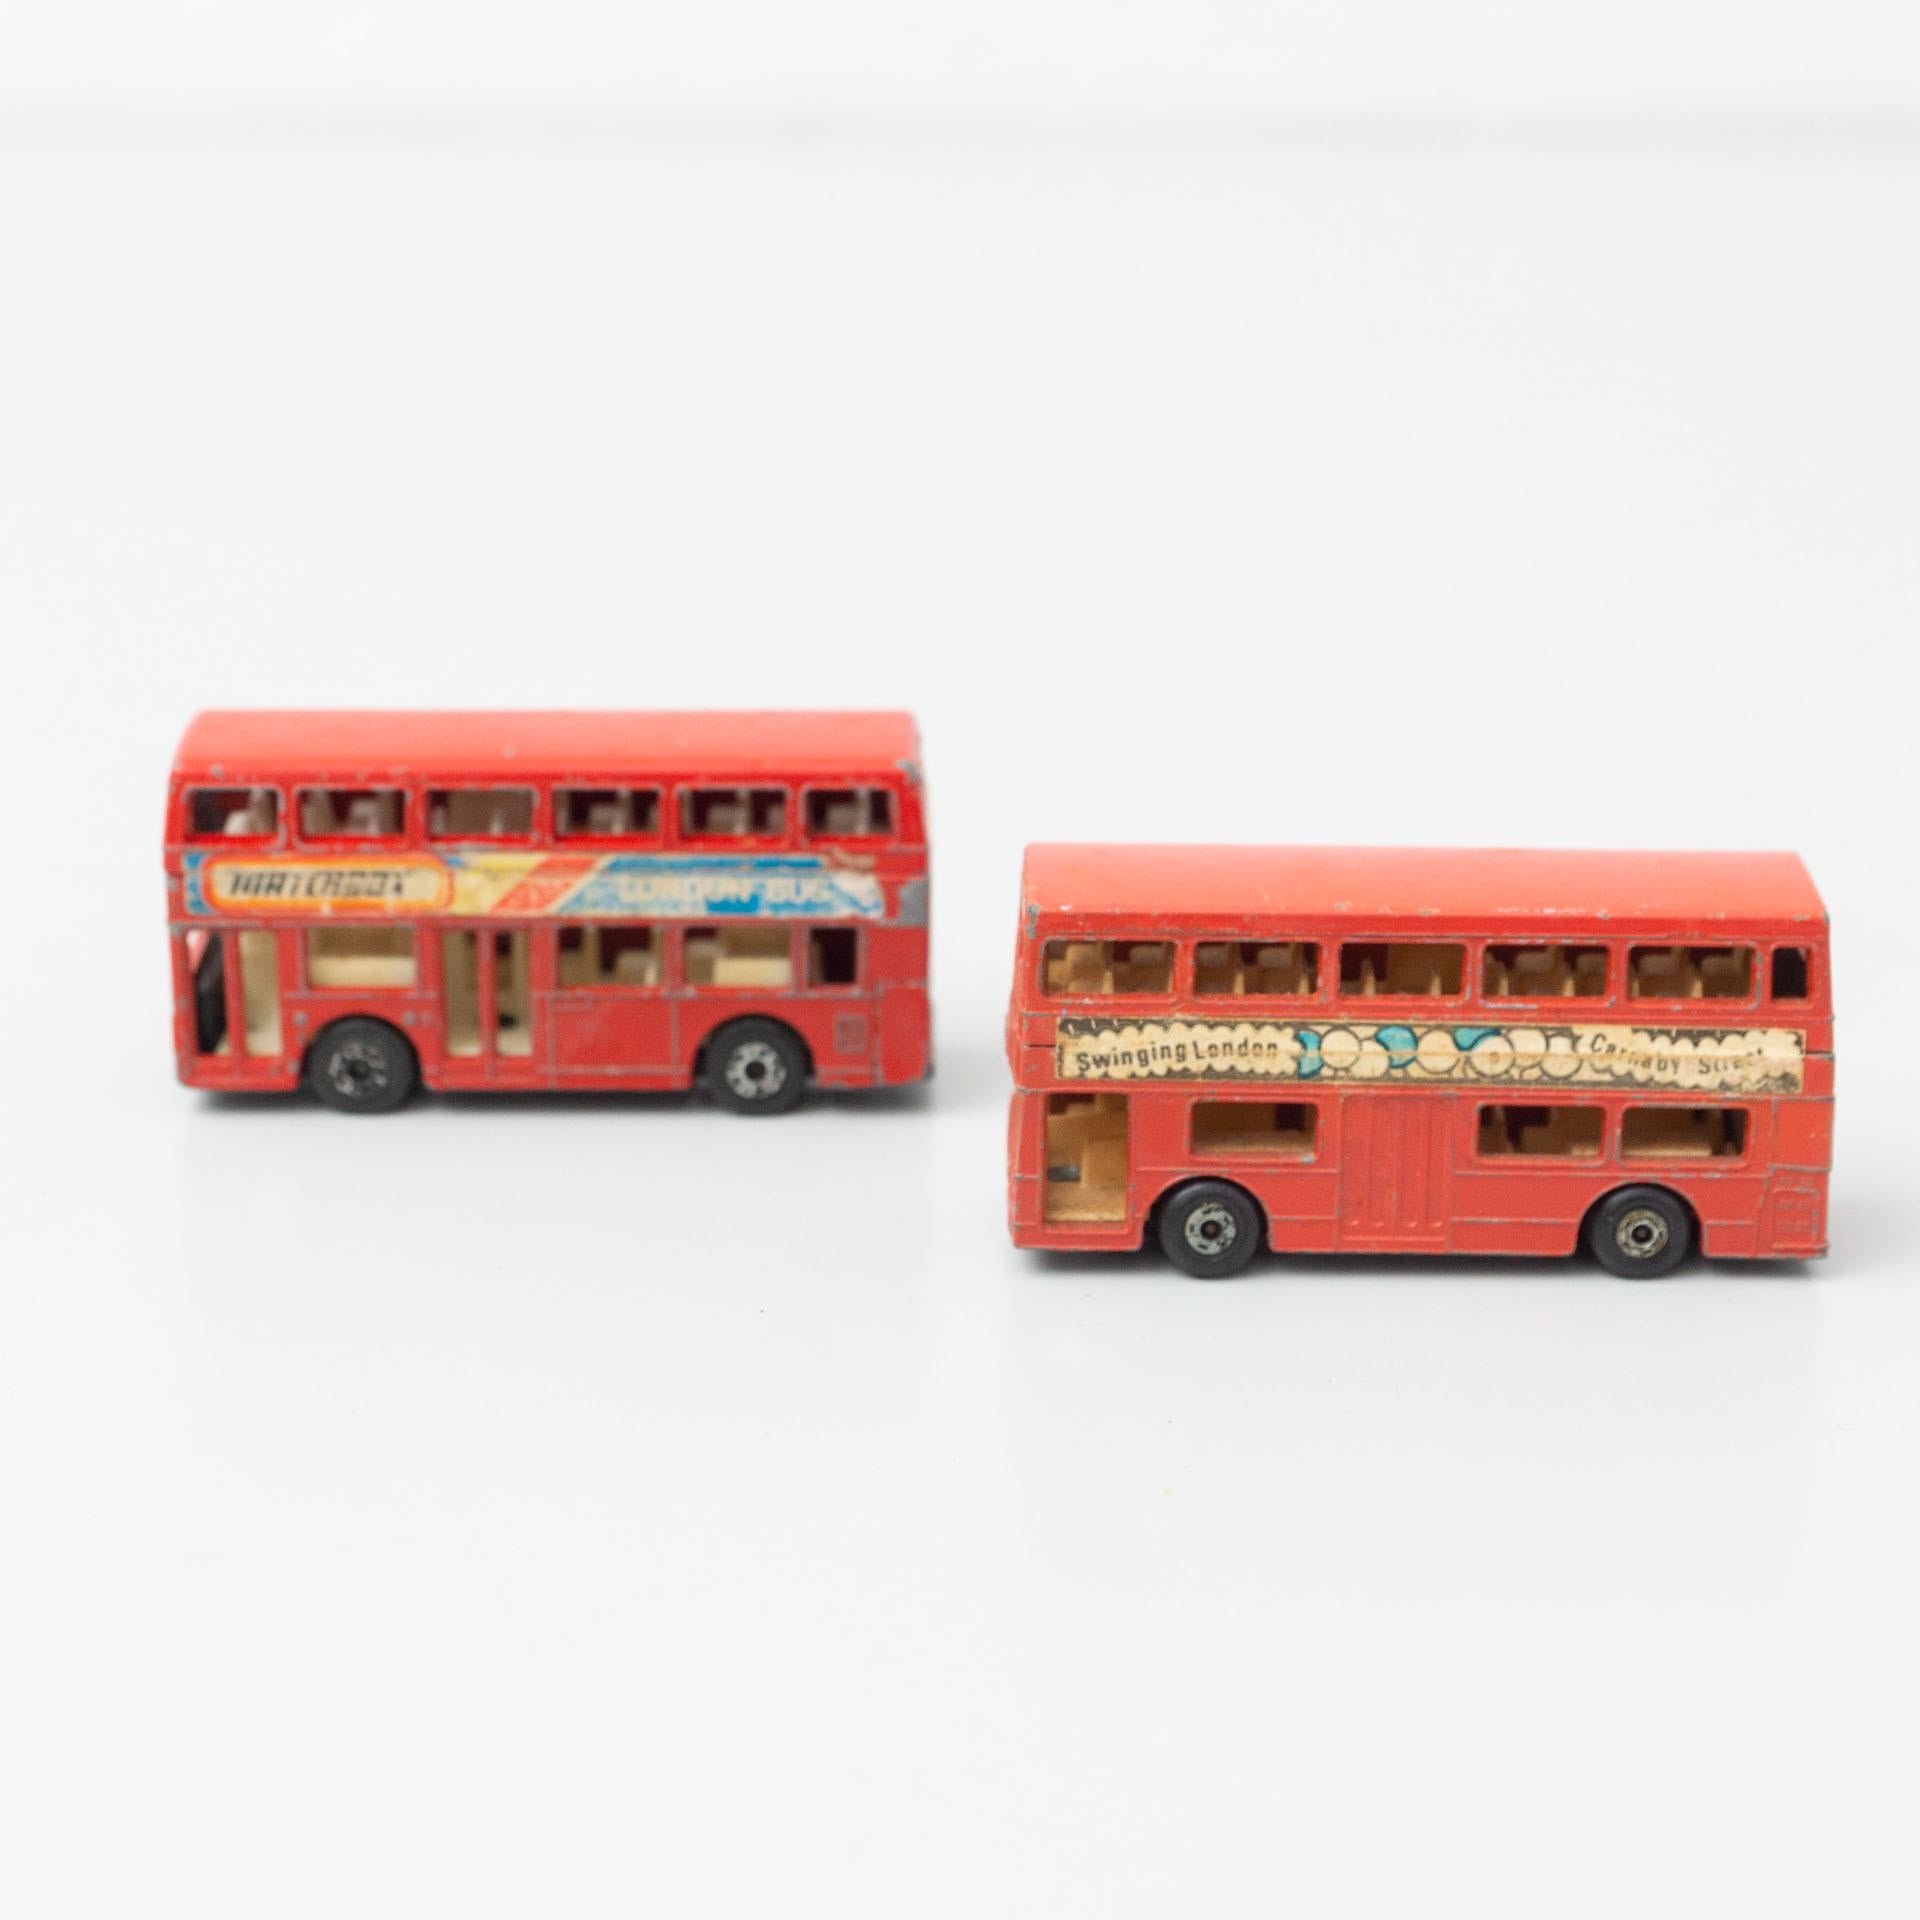 hot london bus toy